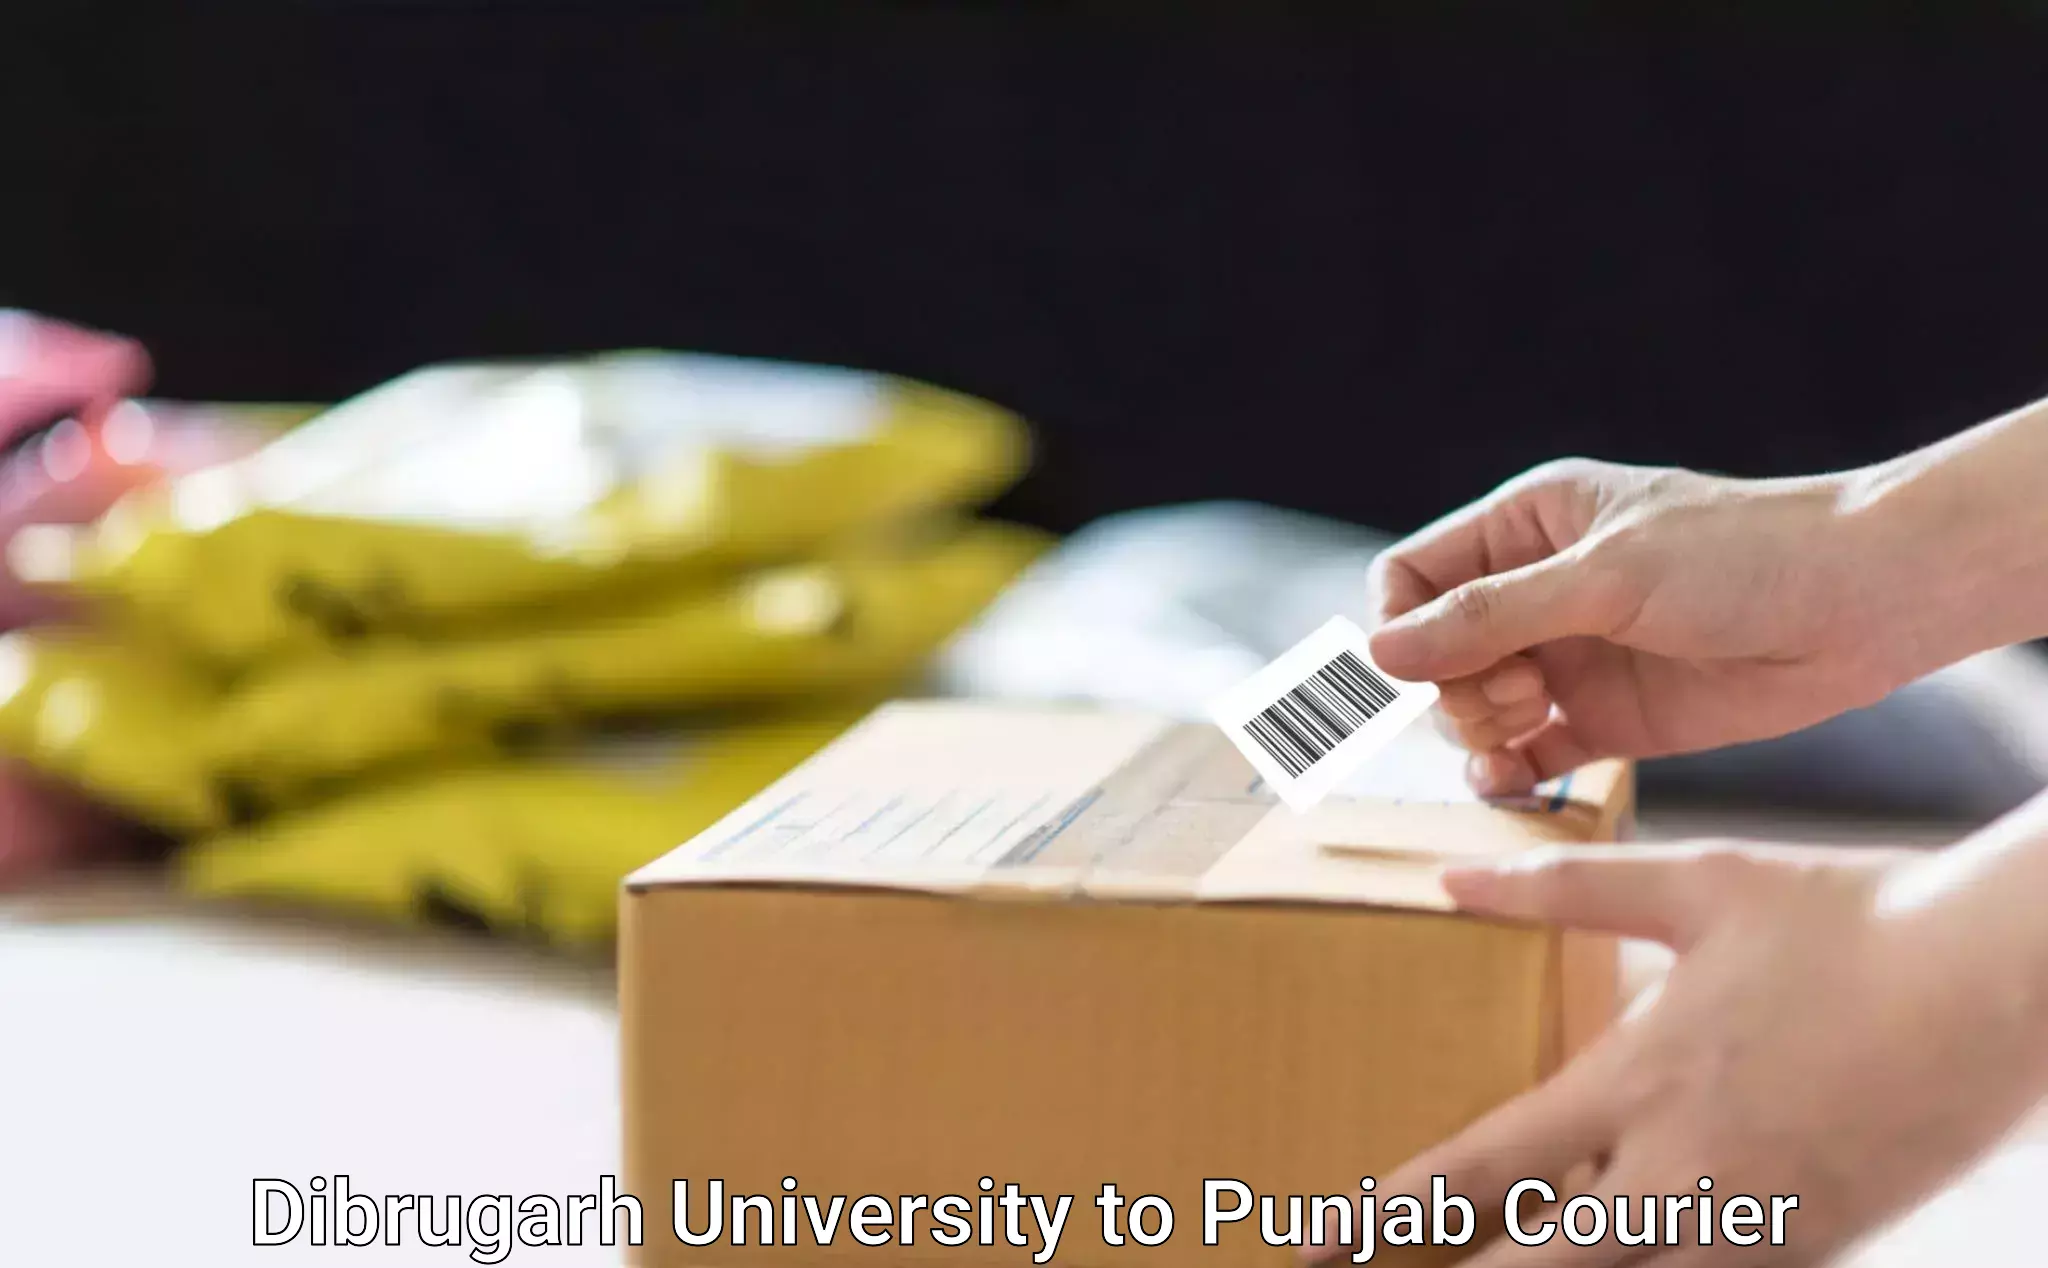 Courier service innovation in Dibrugarh University to Punjab